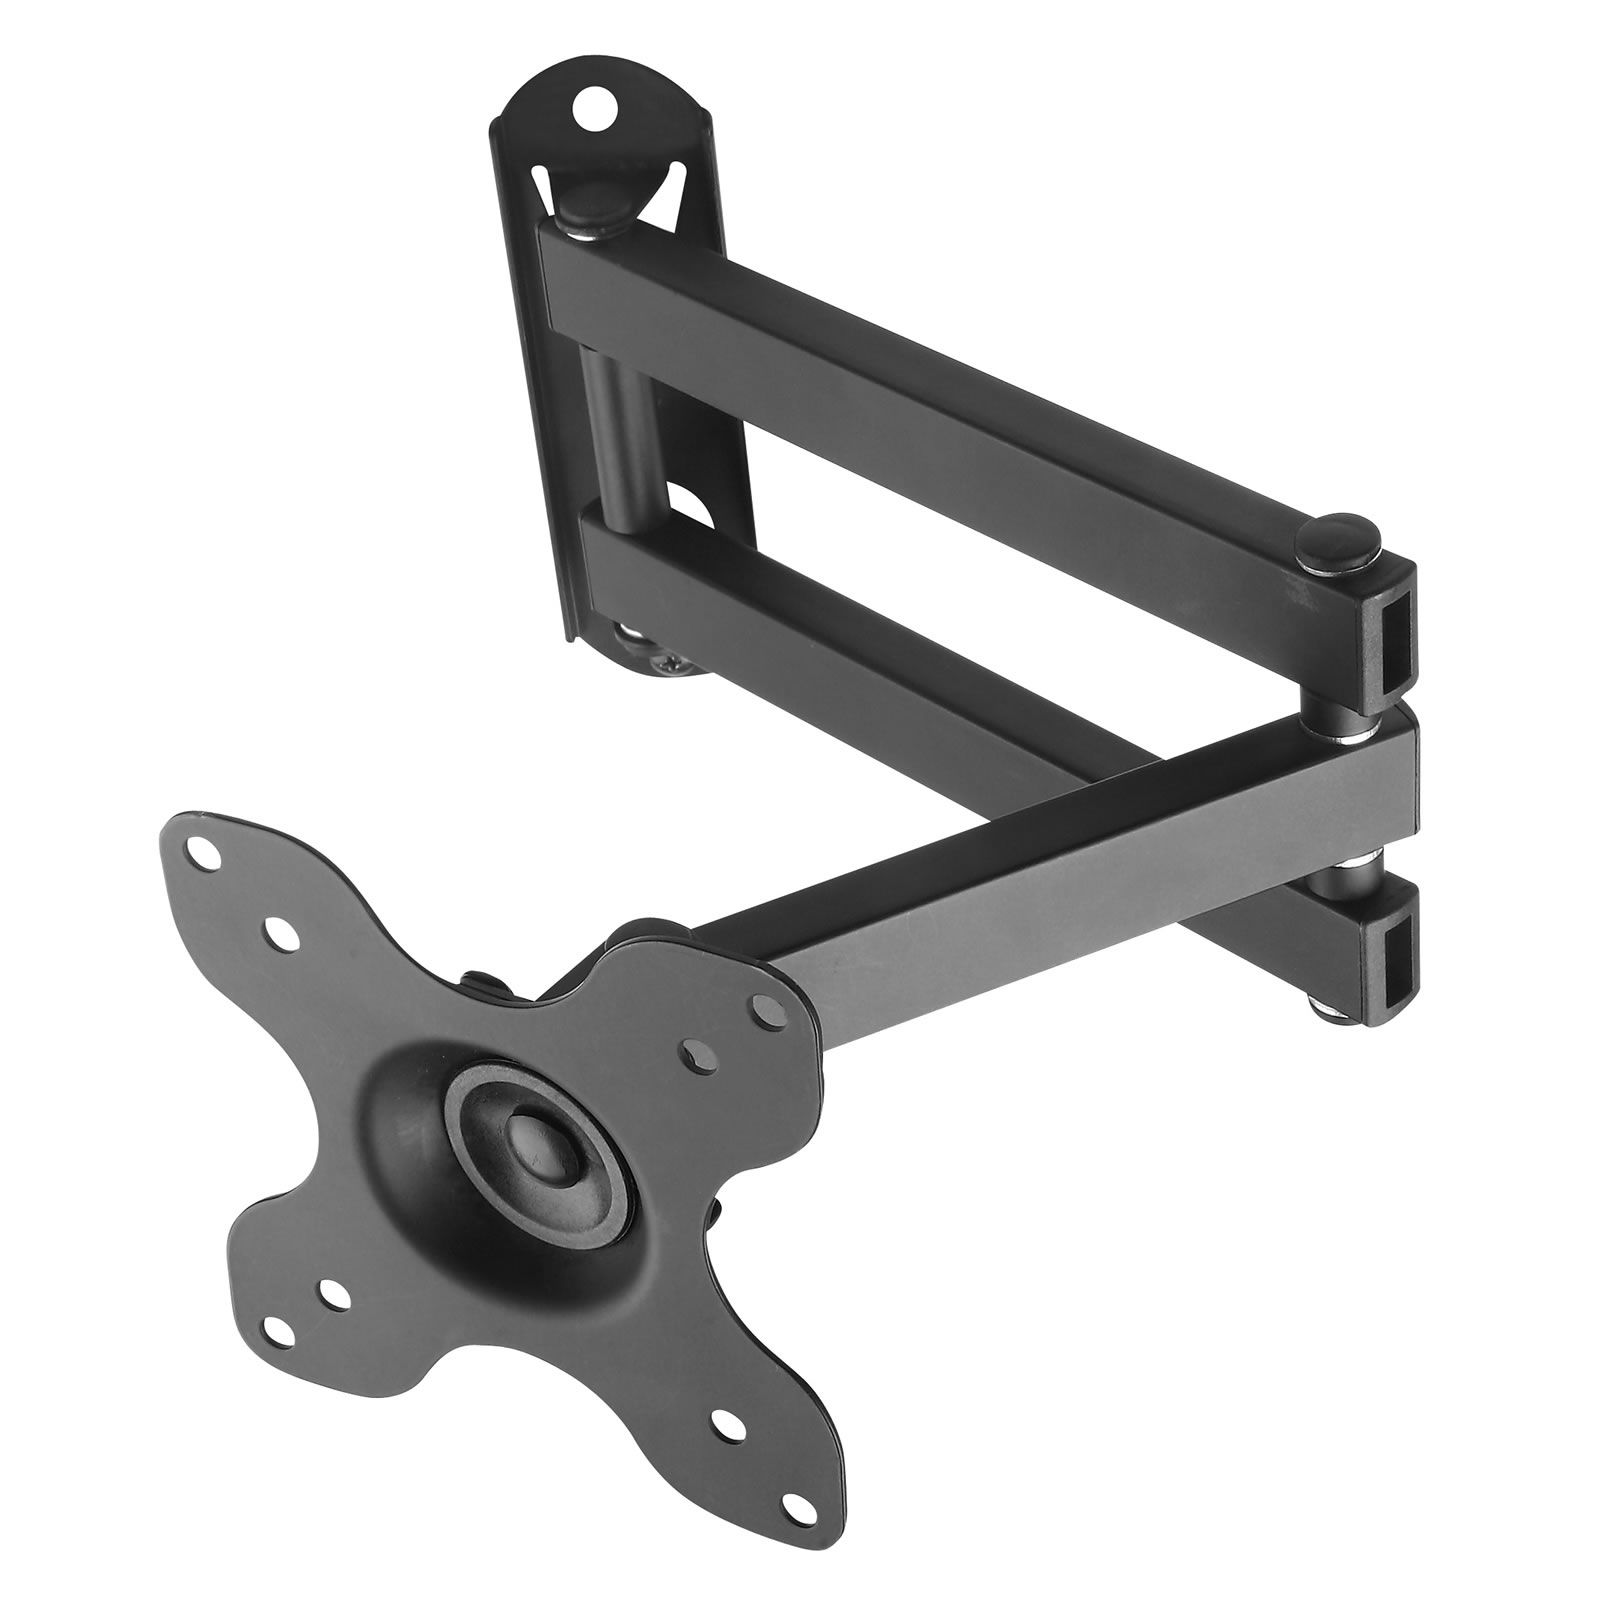 Wall TV Stand Bracket Television Mount Swivel Mounting Holder Tilt Hanger Base Black Fits 13 to 30 Inches